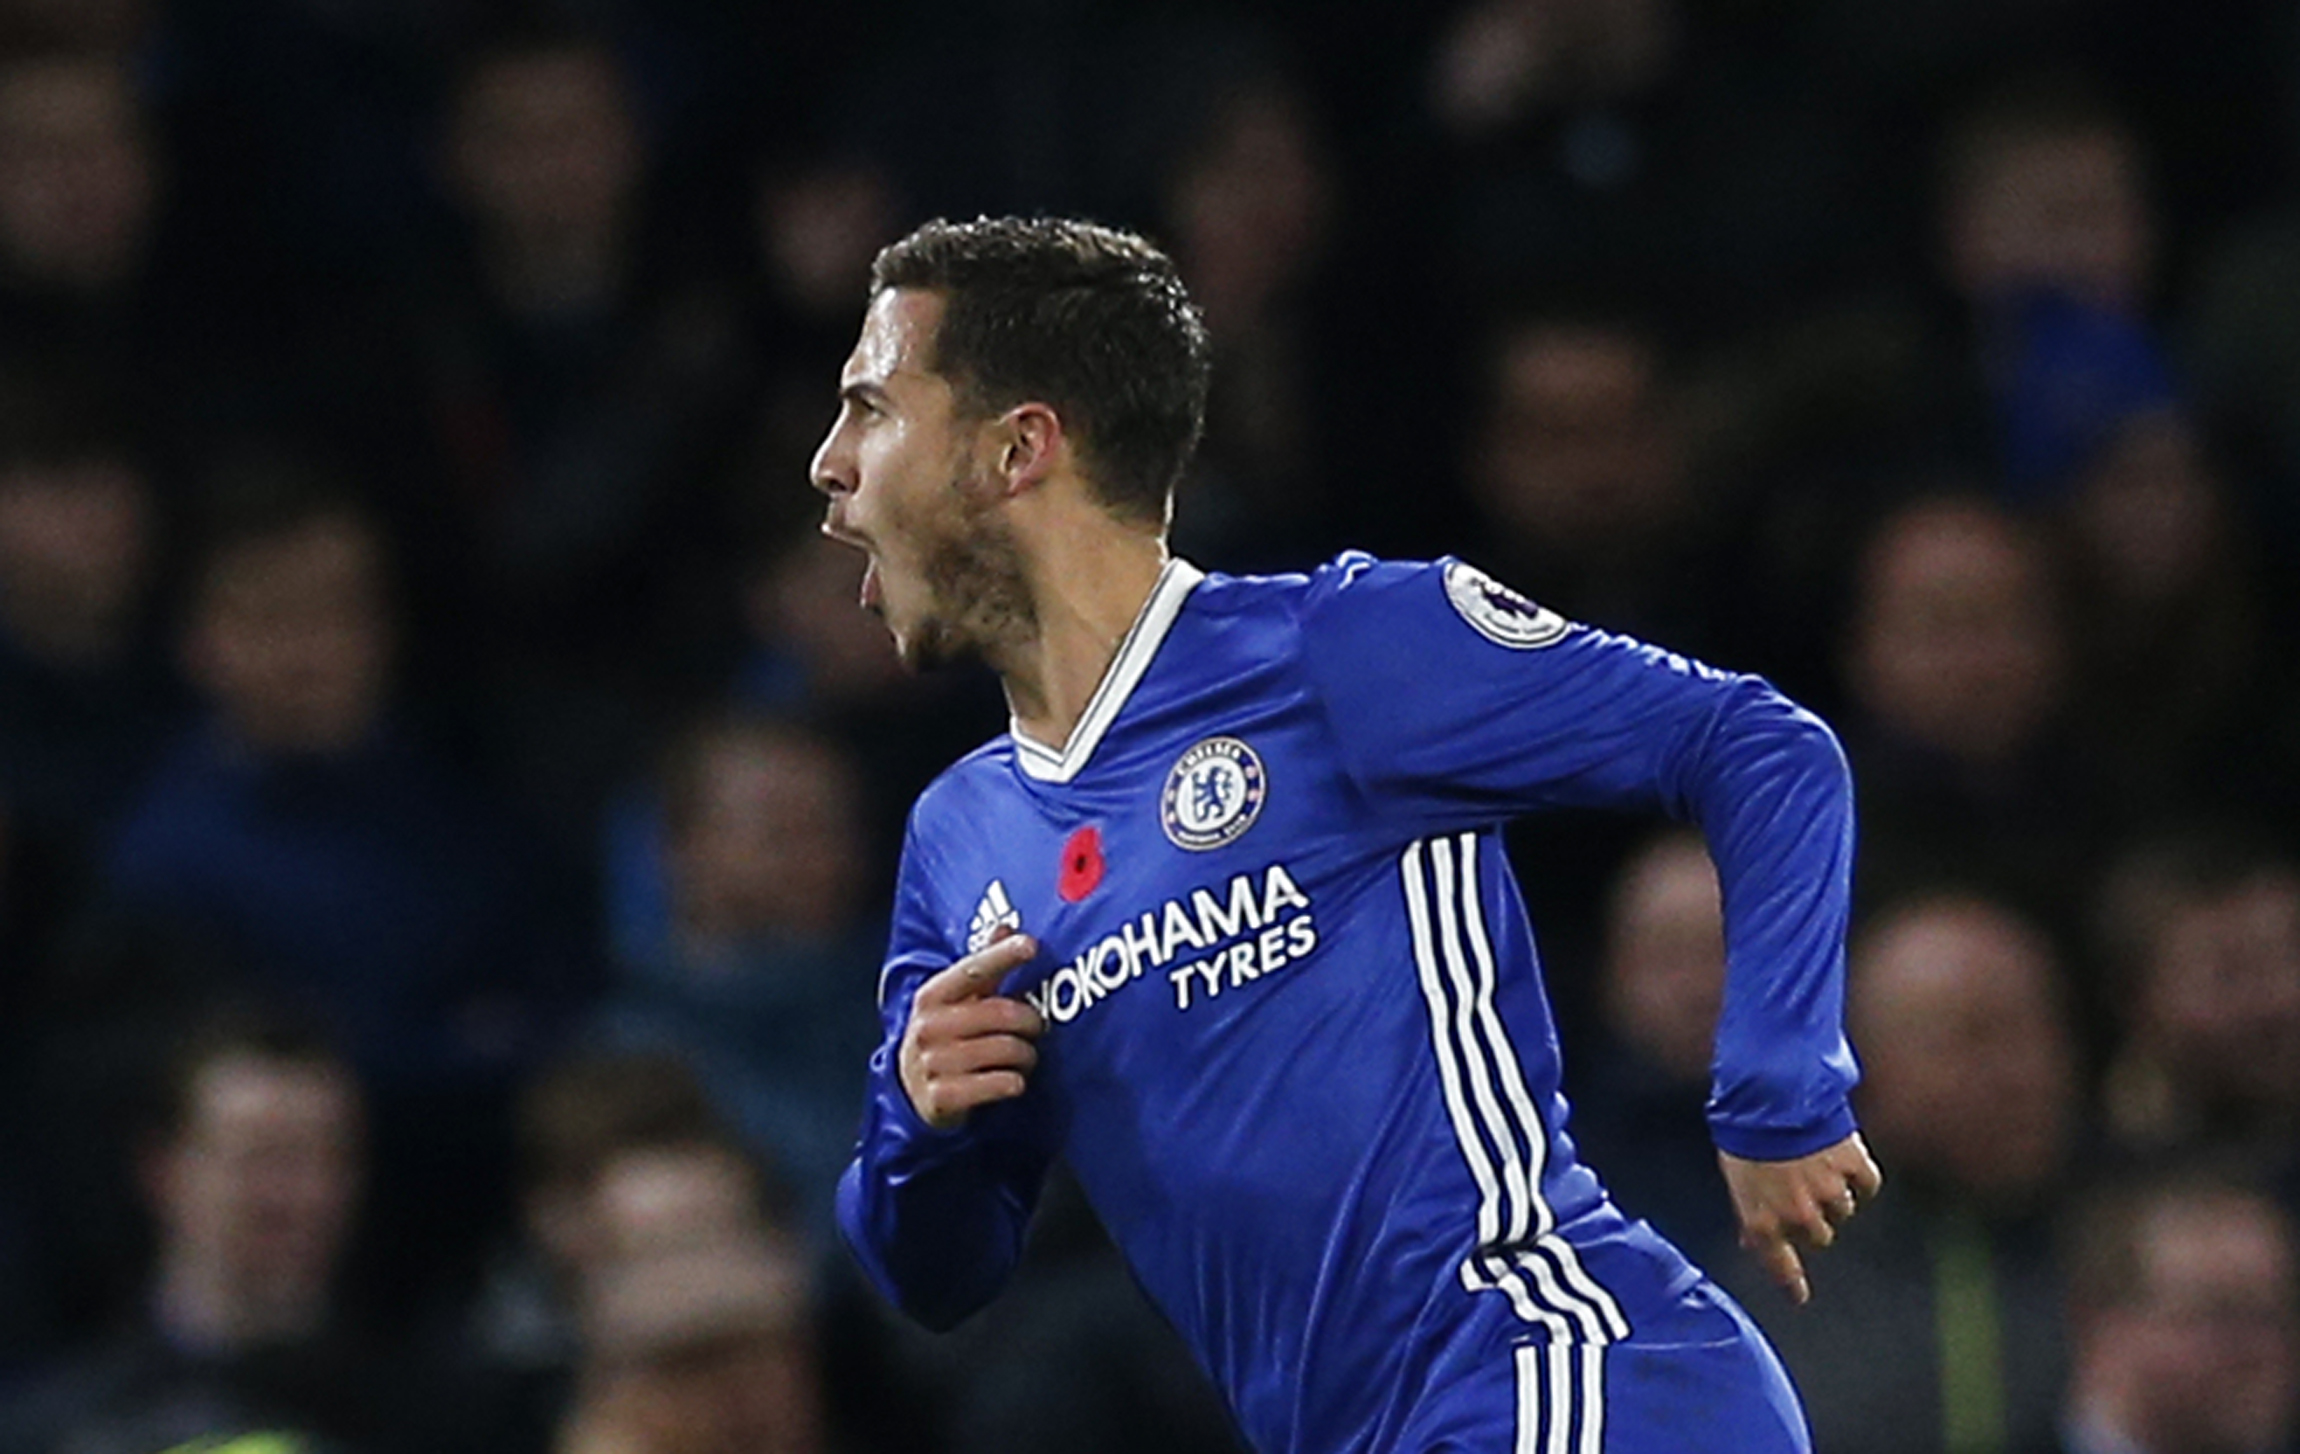 Britain Football Soccer - Chelsea v Everton - Premier League - Stamford Bridge - 5/11/16 Chelsea's Eden Hazard celebrates scoring their first goal Action Images via Reuters / Andrew Couldridge Livepic EDITORIAL USE ONLY. No use with unauthorized audio, video, data, fixture lists, club/league logos or 